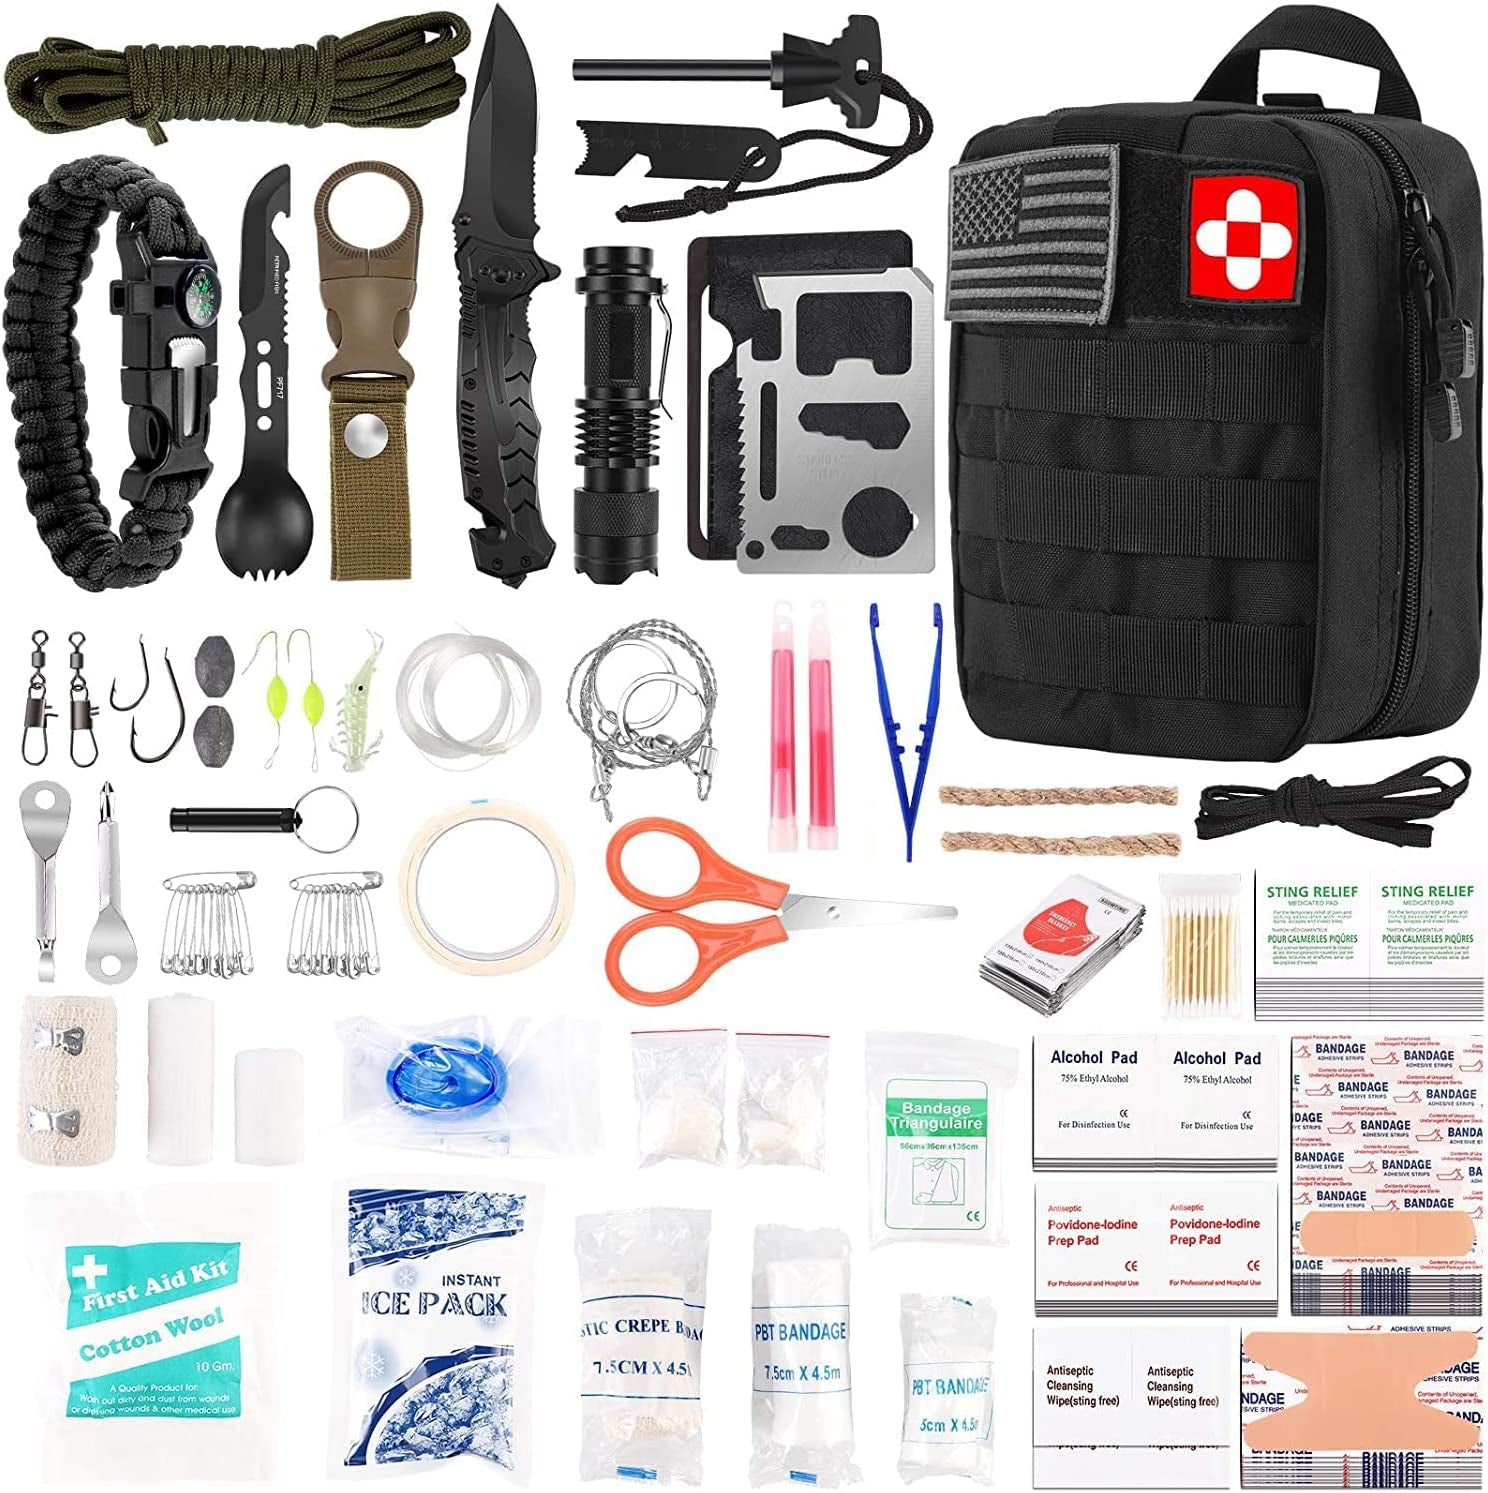 216 Pcs Survival First Aid Kit, Professional Survival Gear Equipment Tools First Aid Supplies for SOS Emergency Hiking Hunting Disaster Camping Adventures